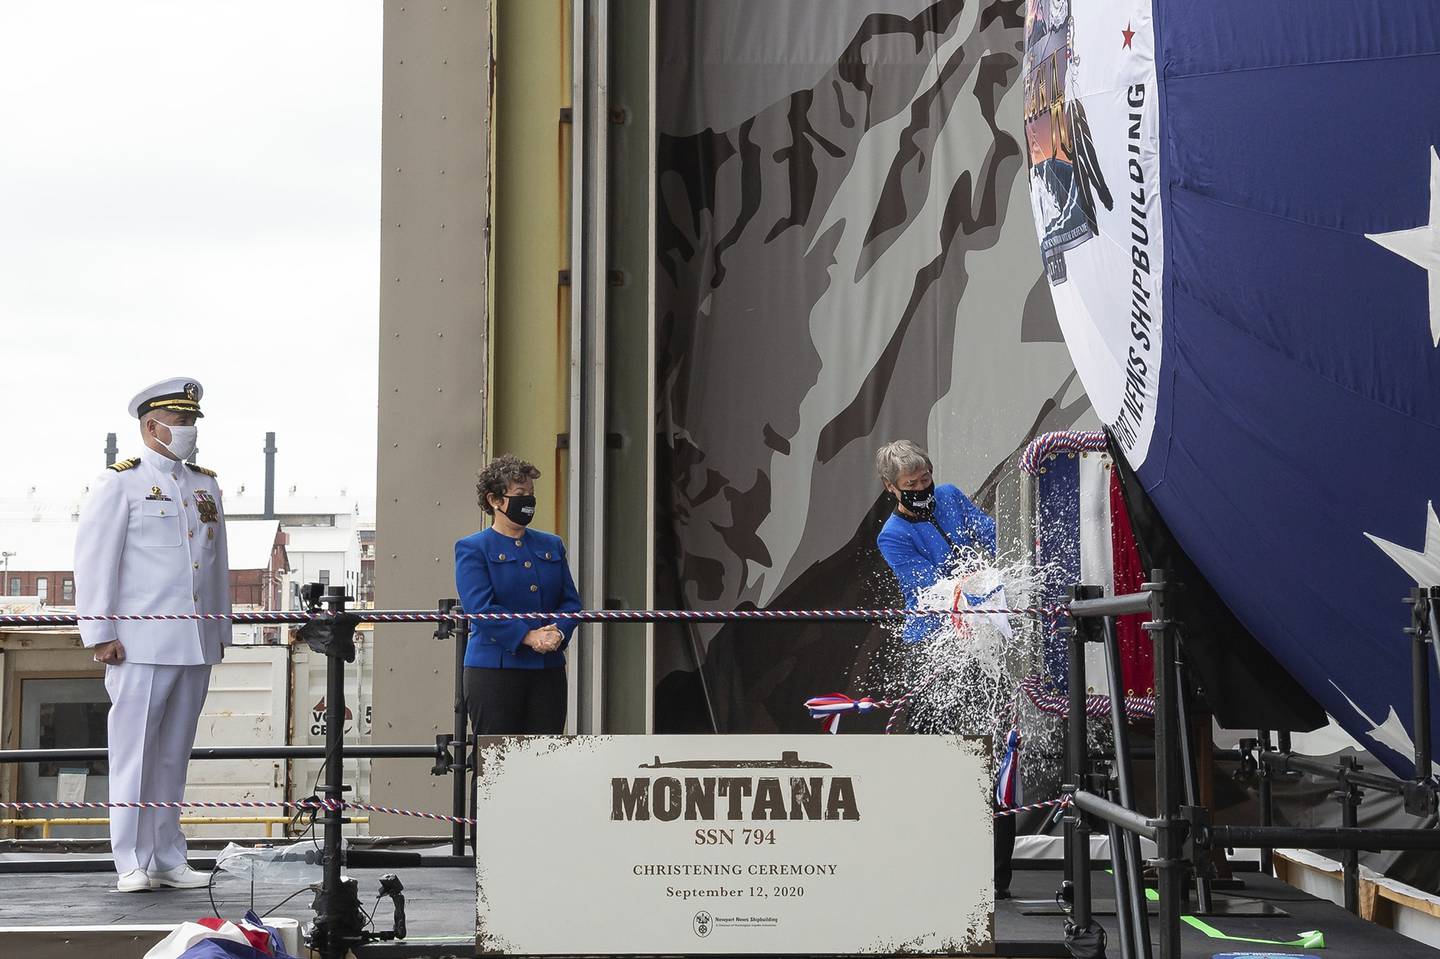 Former Secretary of the Interior Sally Jewell, right, christens the Virginia-class submarine USS Montana, also known as SSN 794, as the ship's commanding officer Capt. Michael Delaney, left, and Newport News Shipbuilding President Jennifer Boykin, look on during its christening ceremony on Saturday, Sept. 12, 2020, in Newport News, Va.